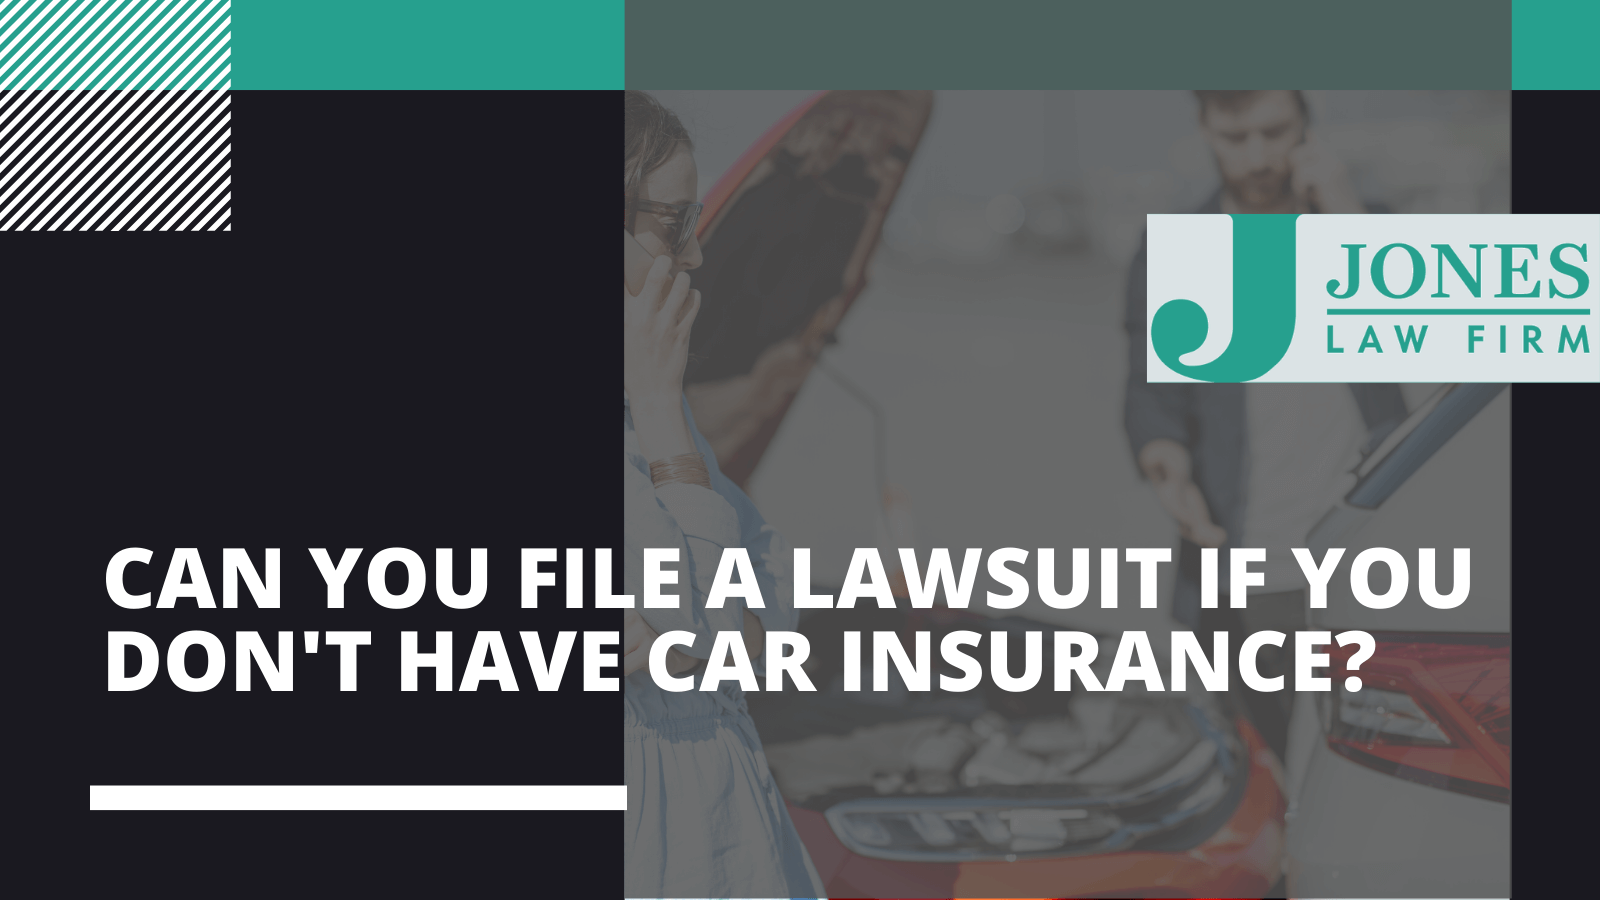 Can you file a lawsuit if you don't have car insurance? - Jones law firm - Alexandria louisiana